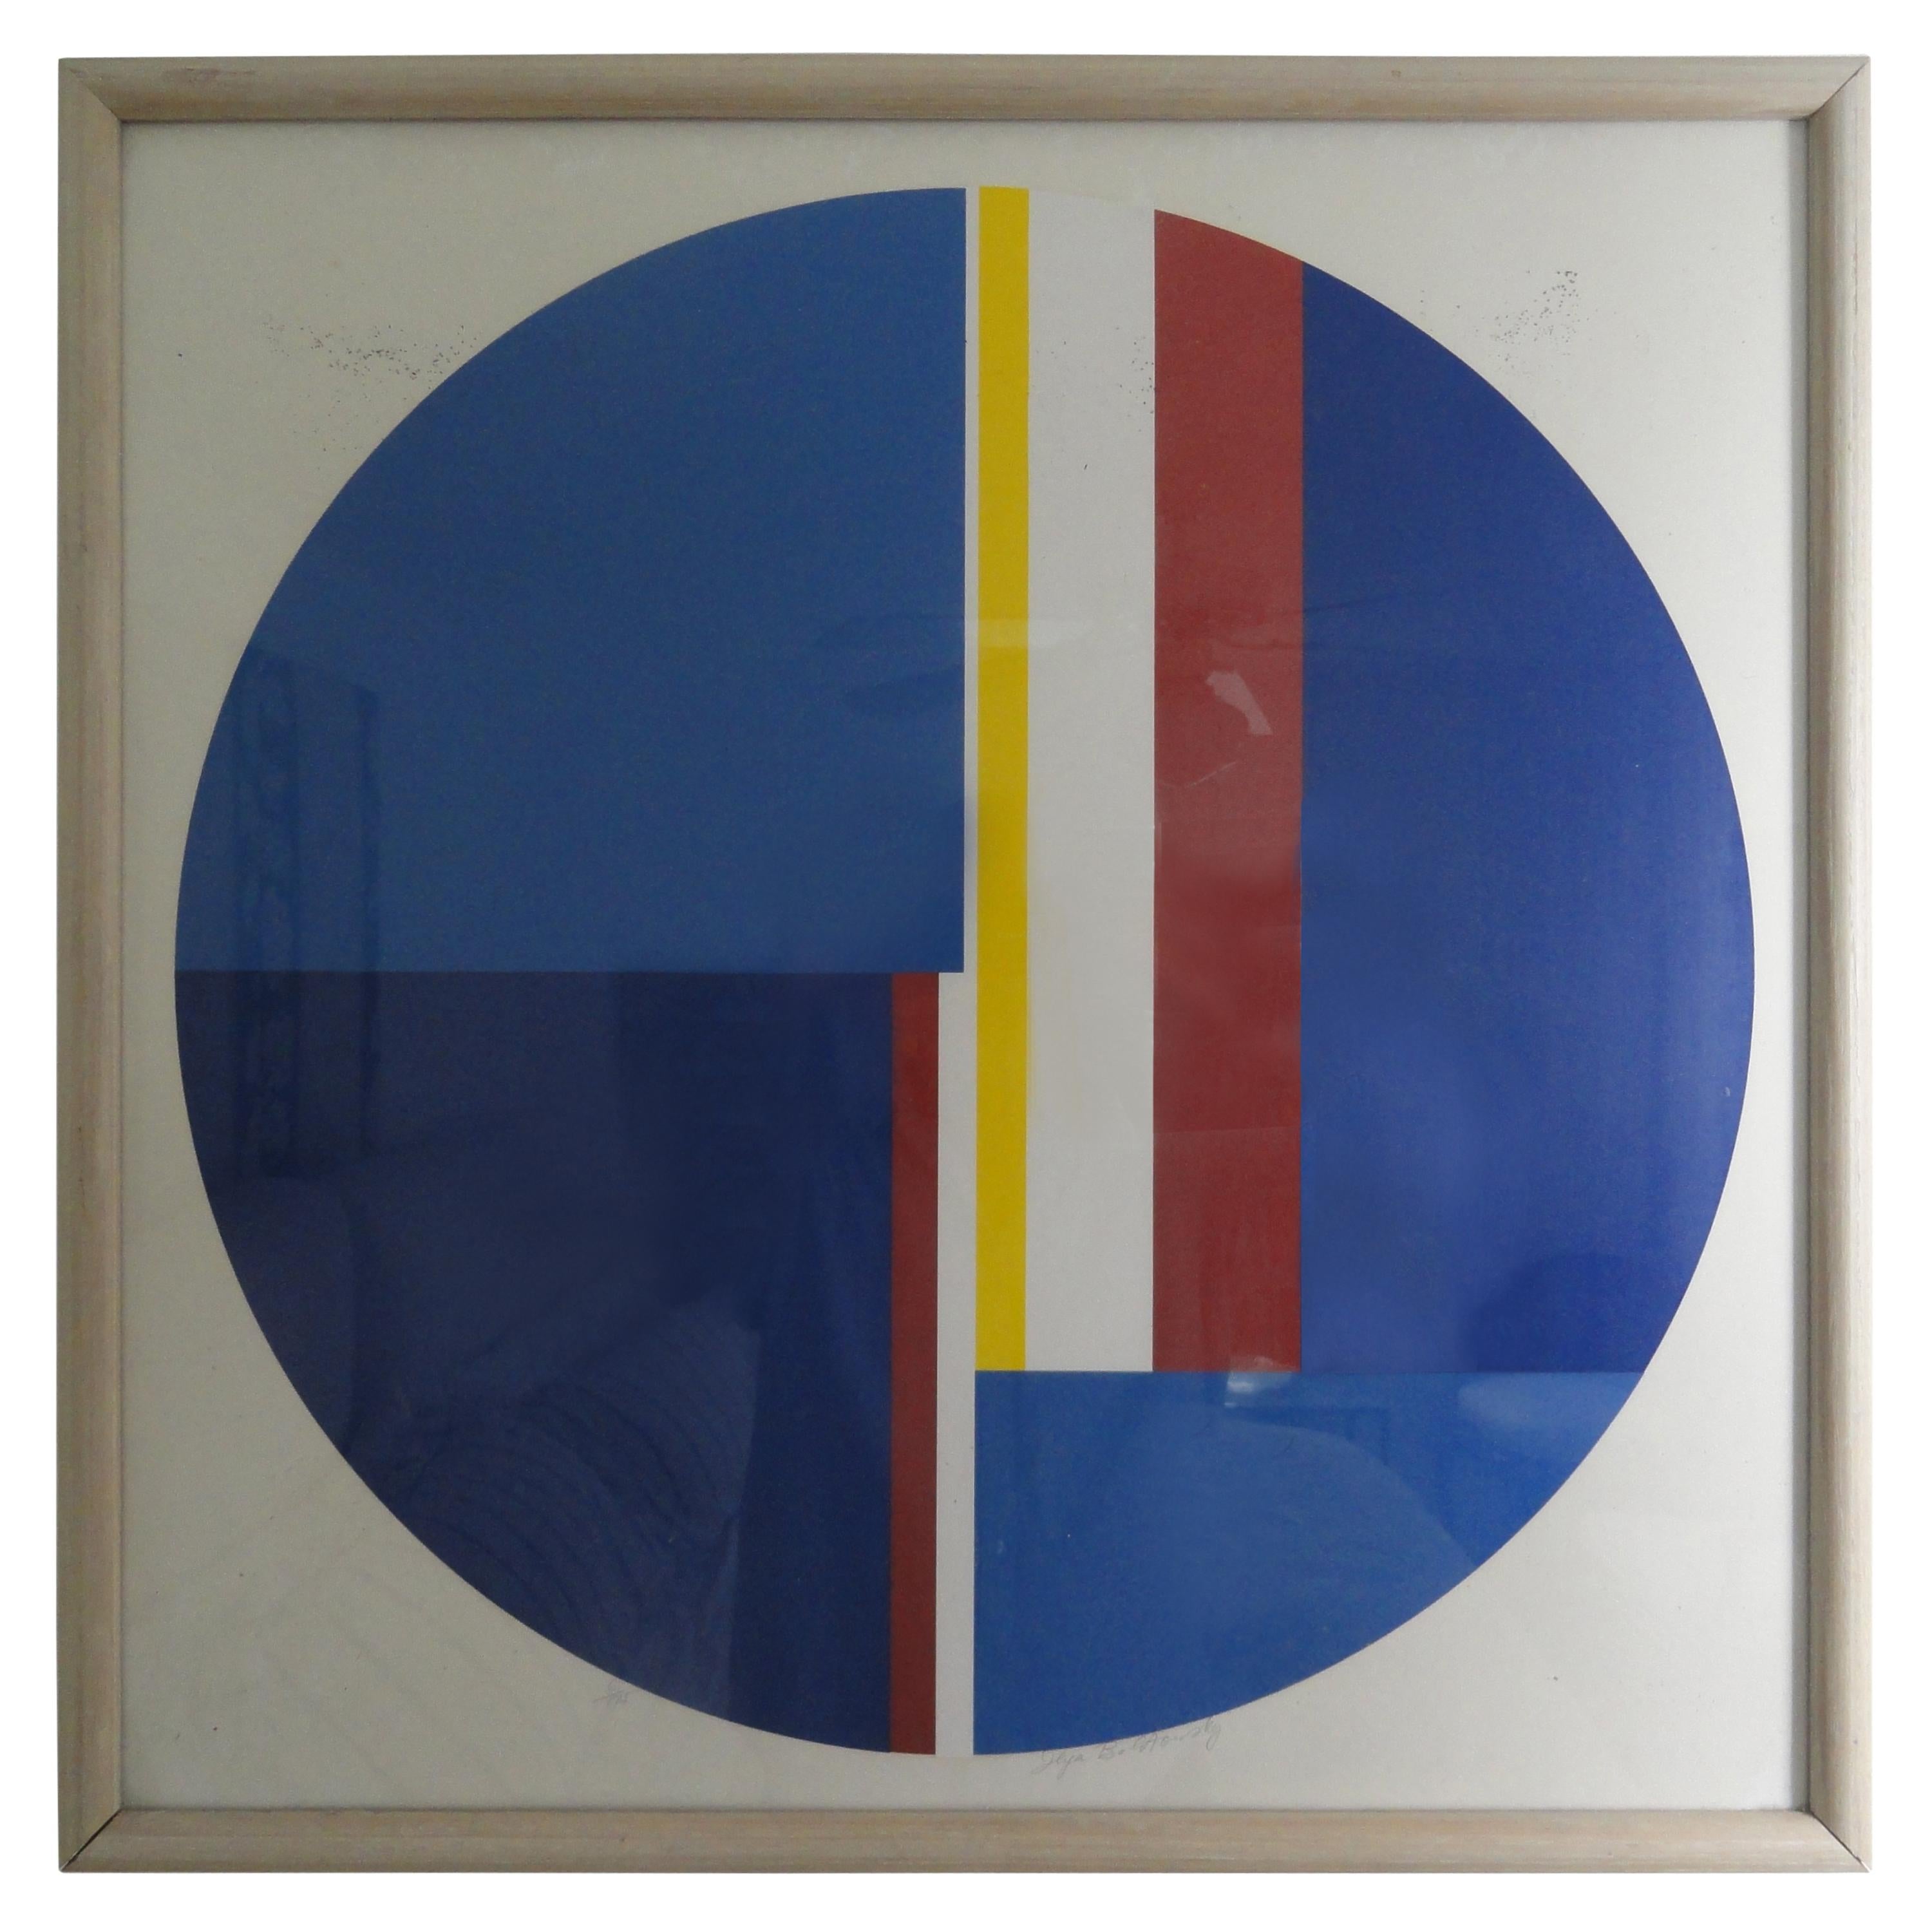 Ilya Bolotowsky "Untitled" Blue Tonde, Signed And Numbered Screenprint  For Sale